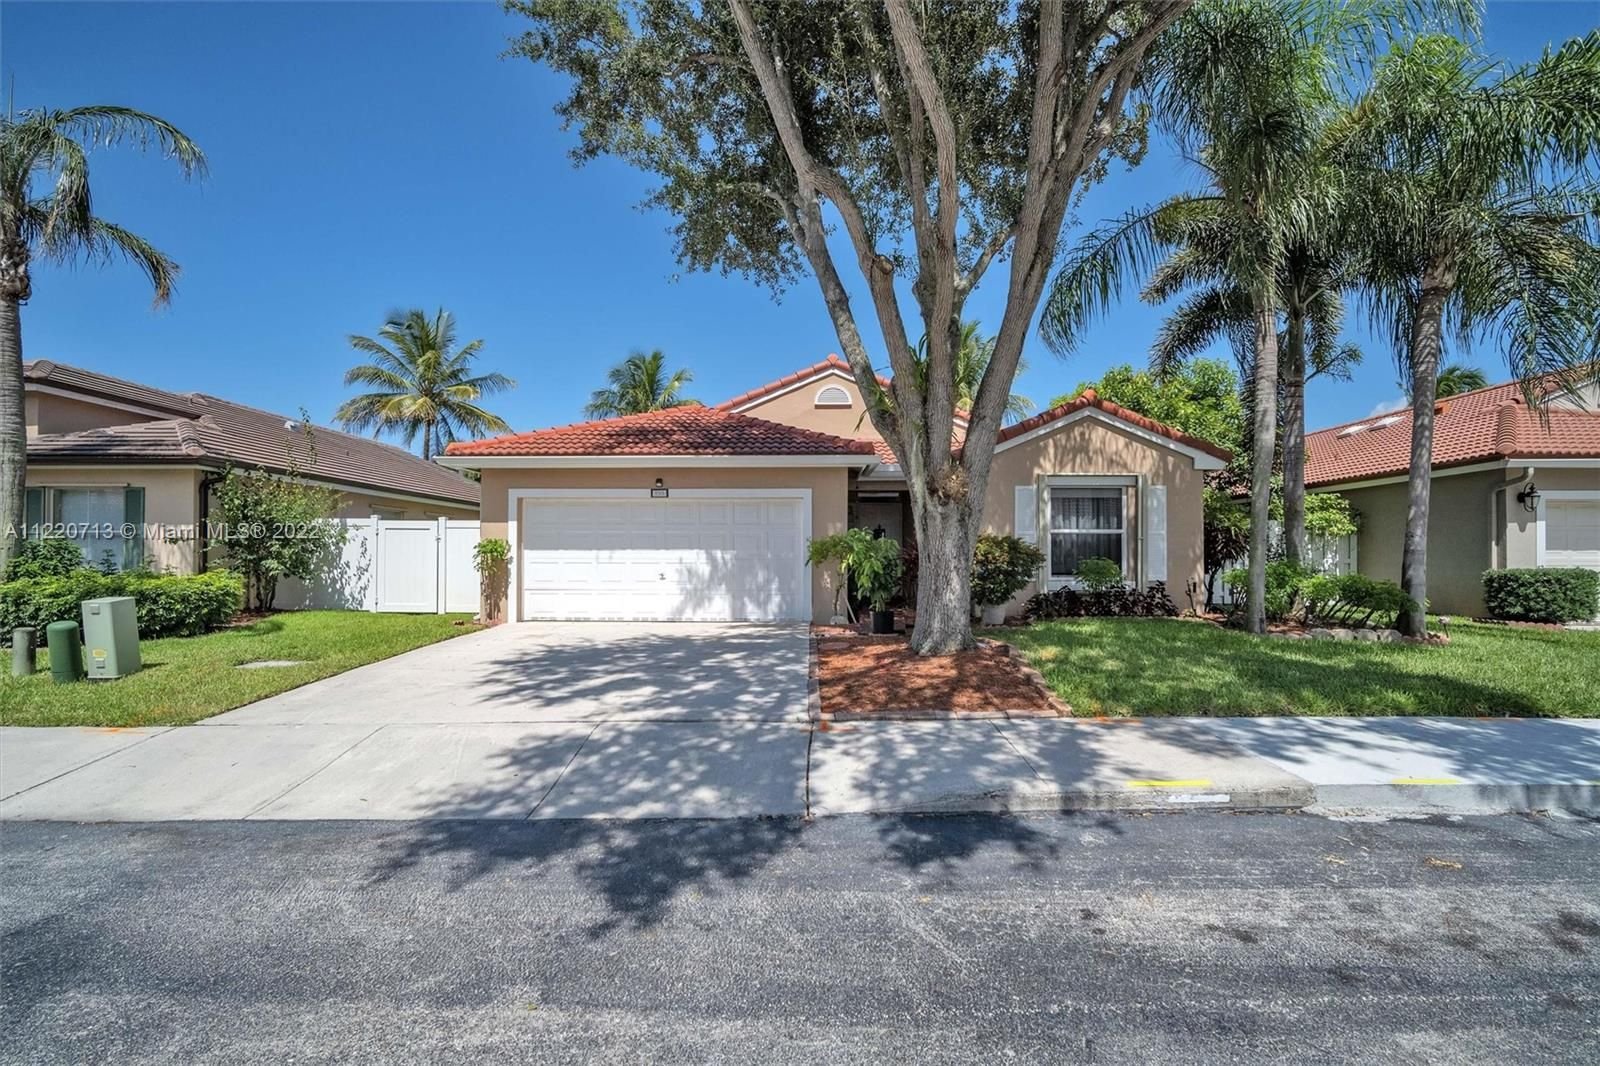 Real estate property located at 295 165th Ave, Broward County, Pembroke Pines, FL